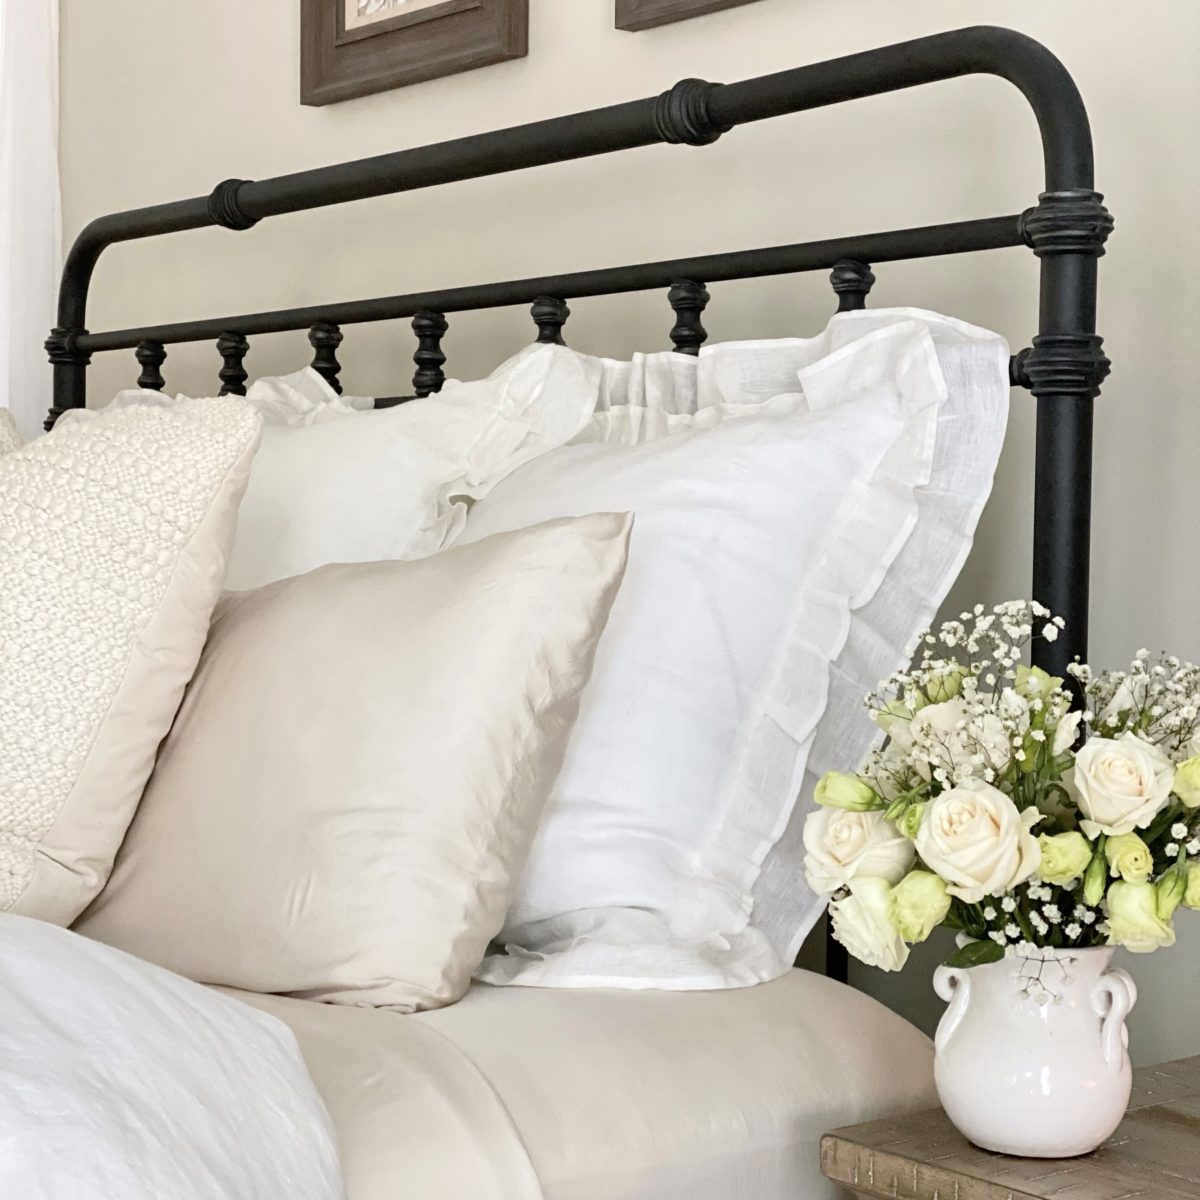 Close-up of winter white pillows on an iron bed with a white floral arrangement in the foreground.